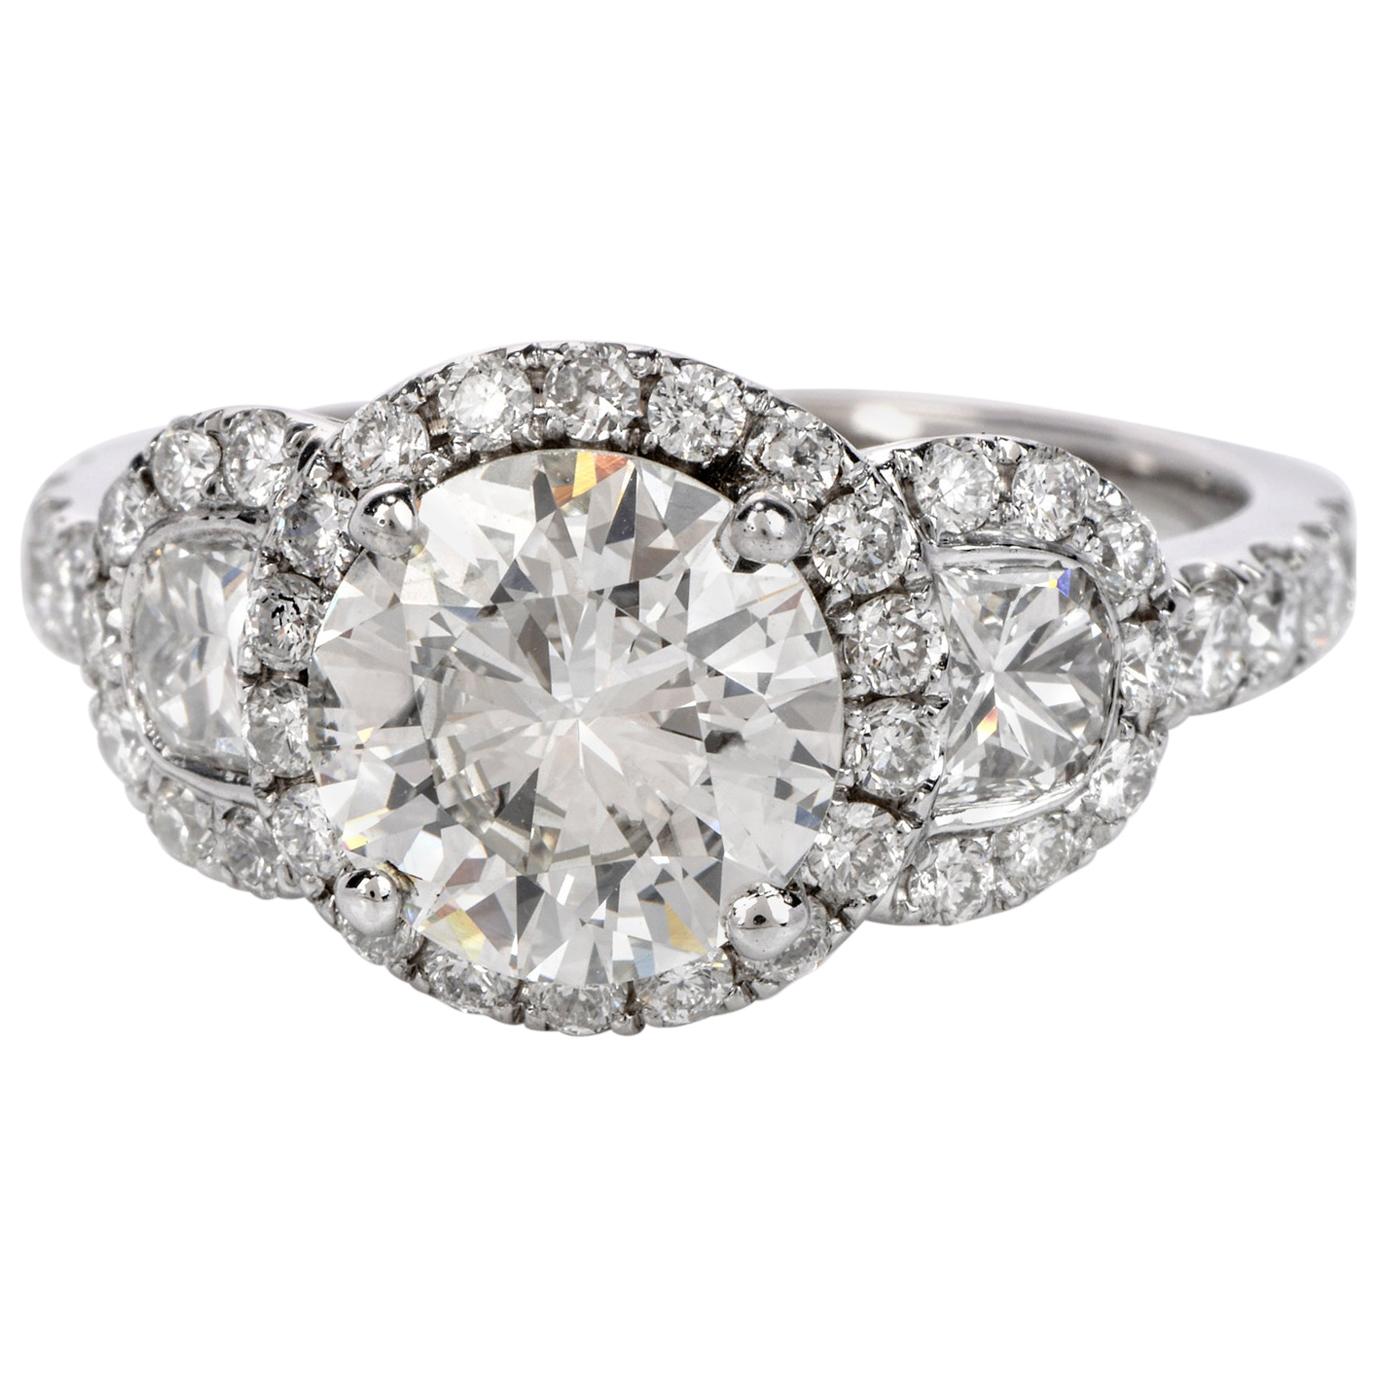 Reminisce on your love from your past, profess your love in the present, and vow to your

 sweetheart with your entire future with this stunning  Round Diamond 18K Gold 3 Stone Halo Engagement Ring!

It features a round cut, GIA certified, 1.72